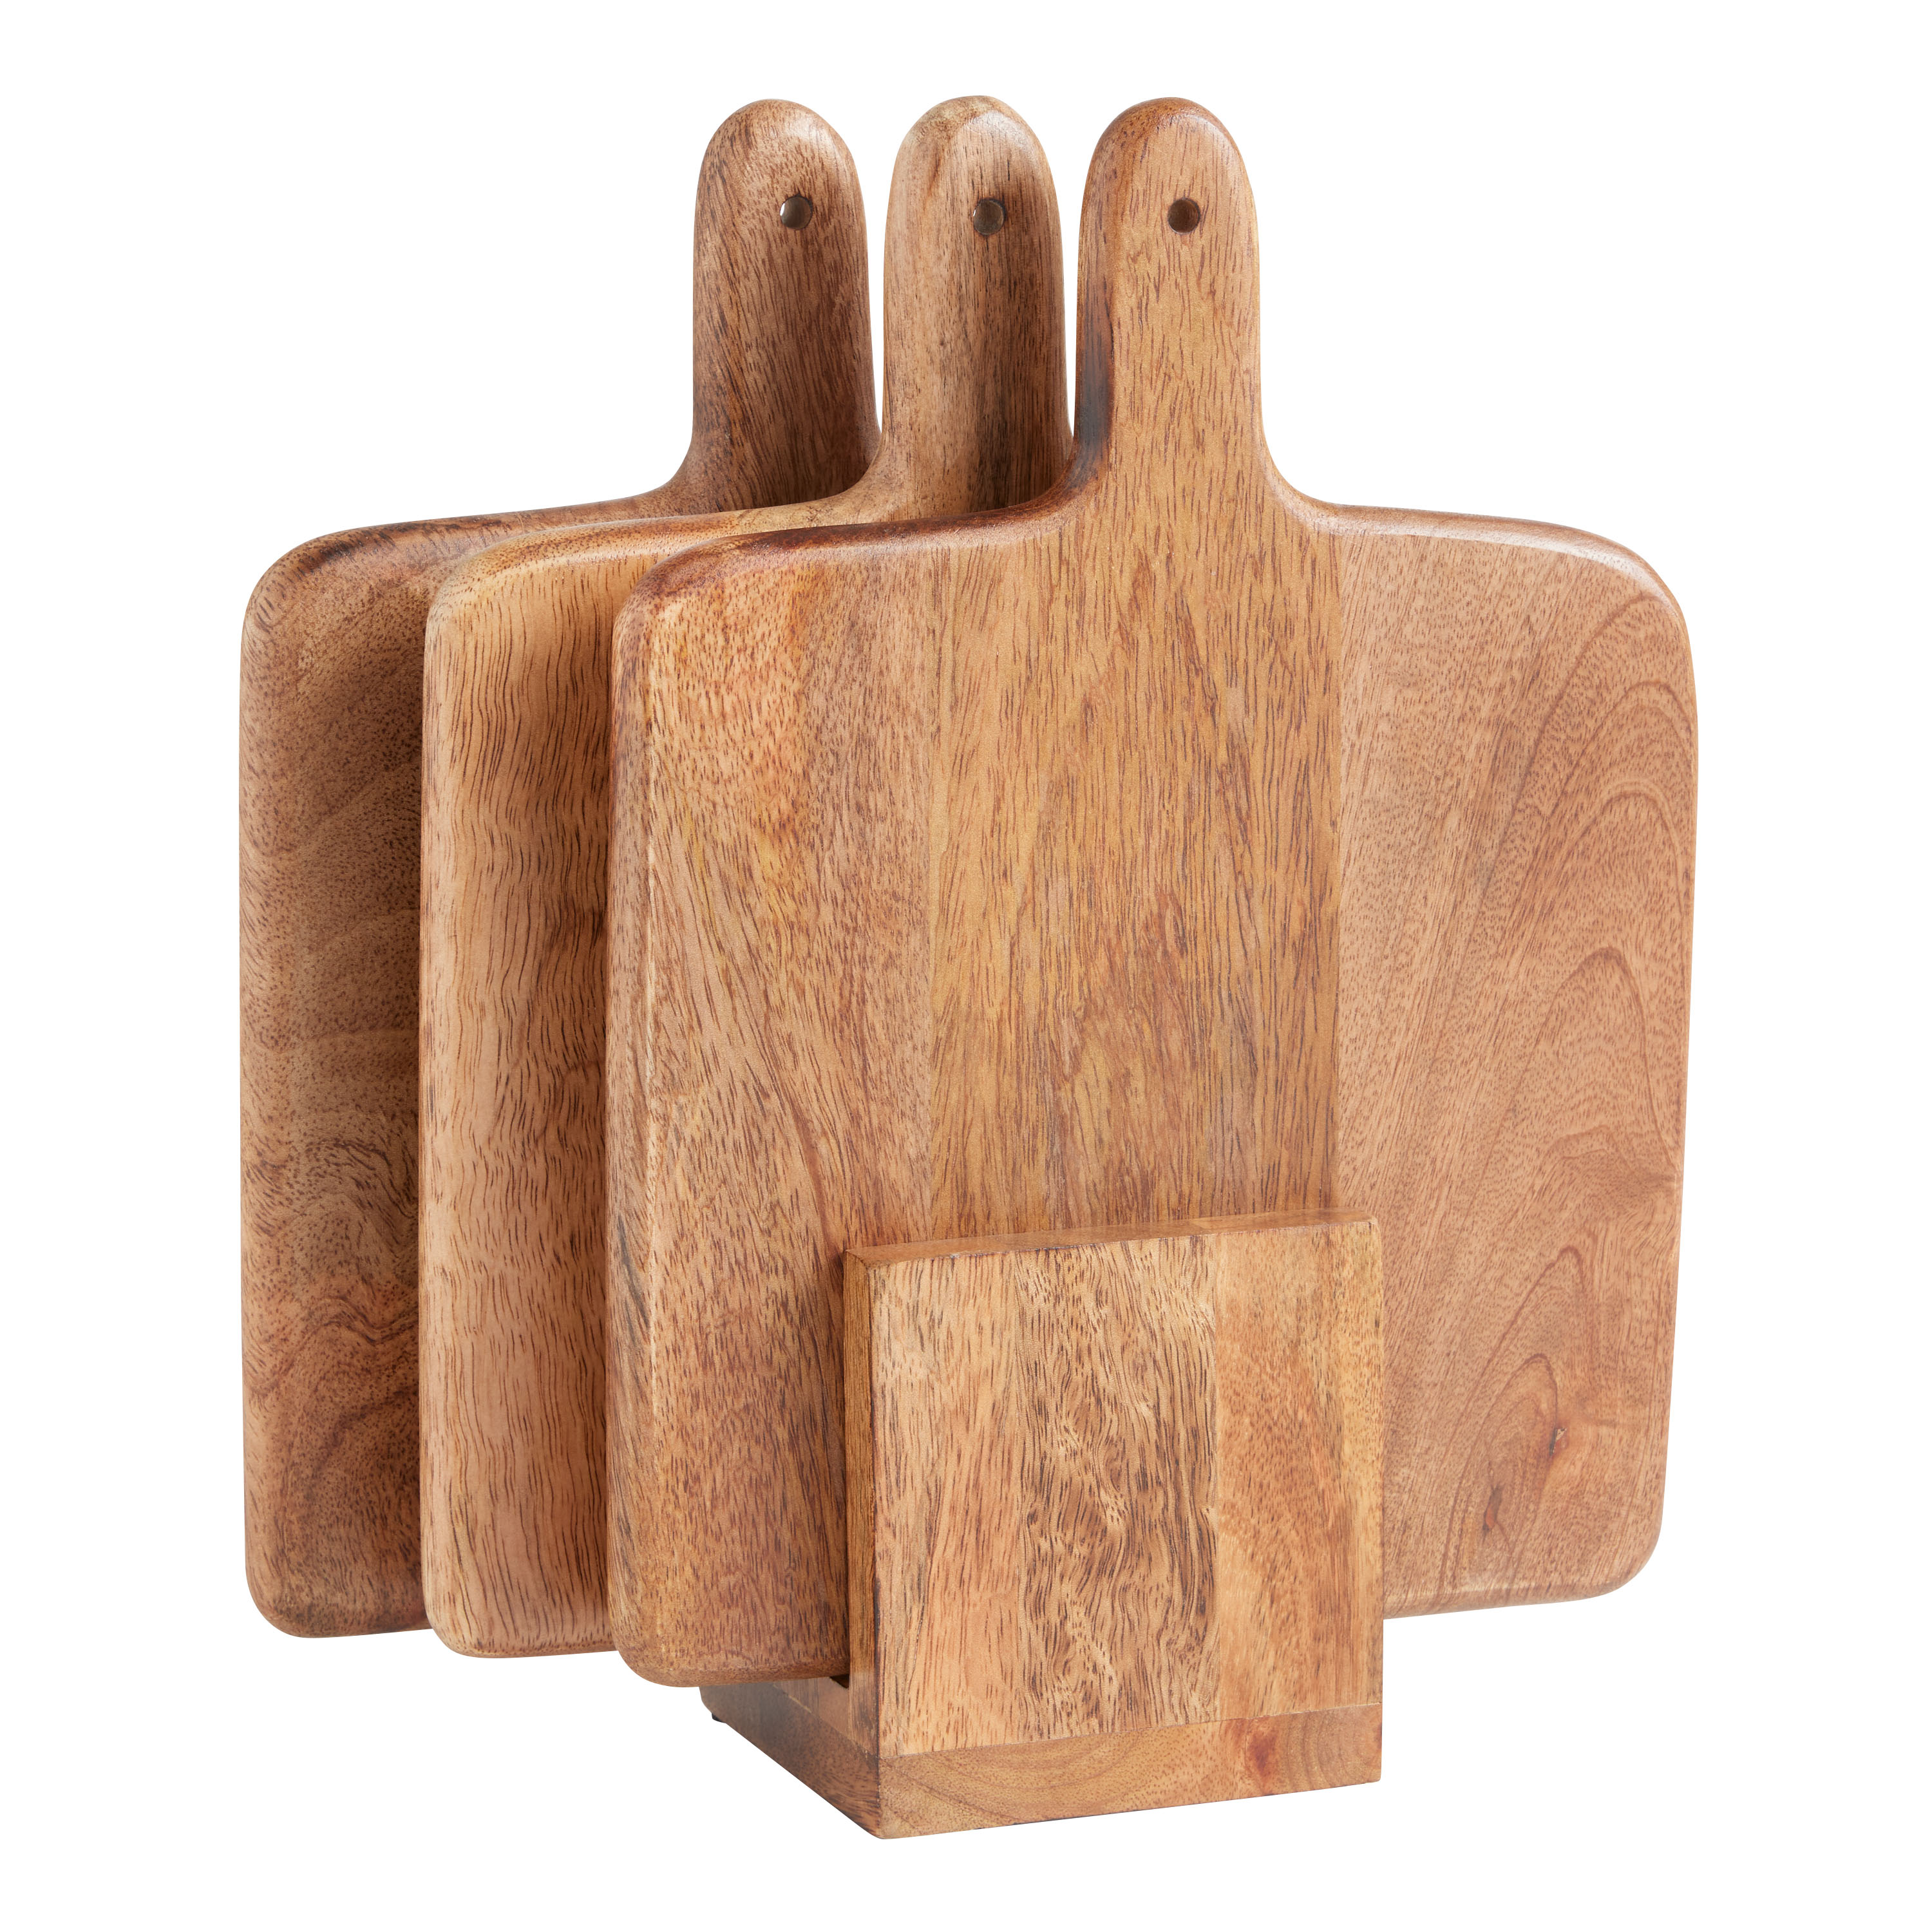 3 Pieces Christmas Kitchen Cutting Board Set with Handles Organic Acacia  Kitchen Accessories Chopping Board Christmas Tree Shaped Charcuterie Board